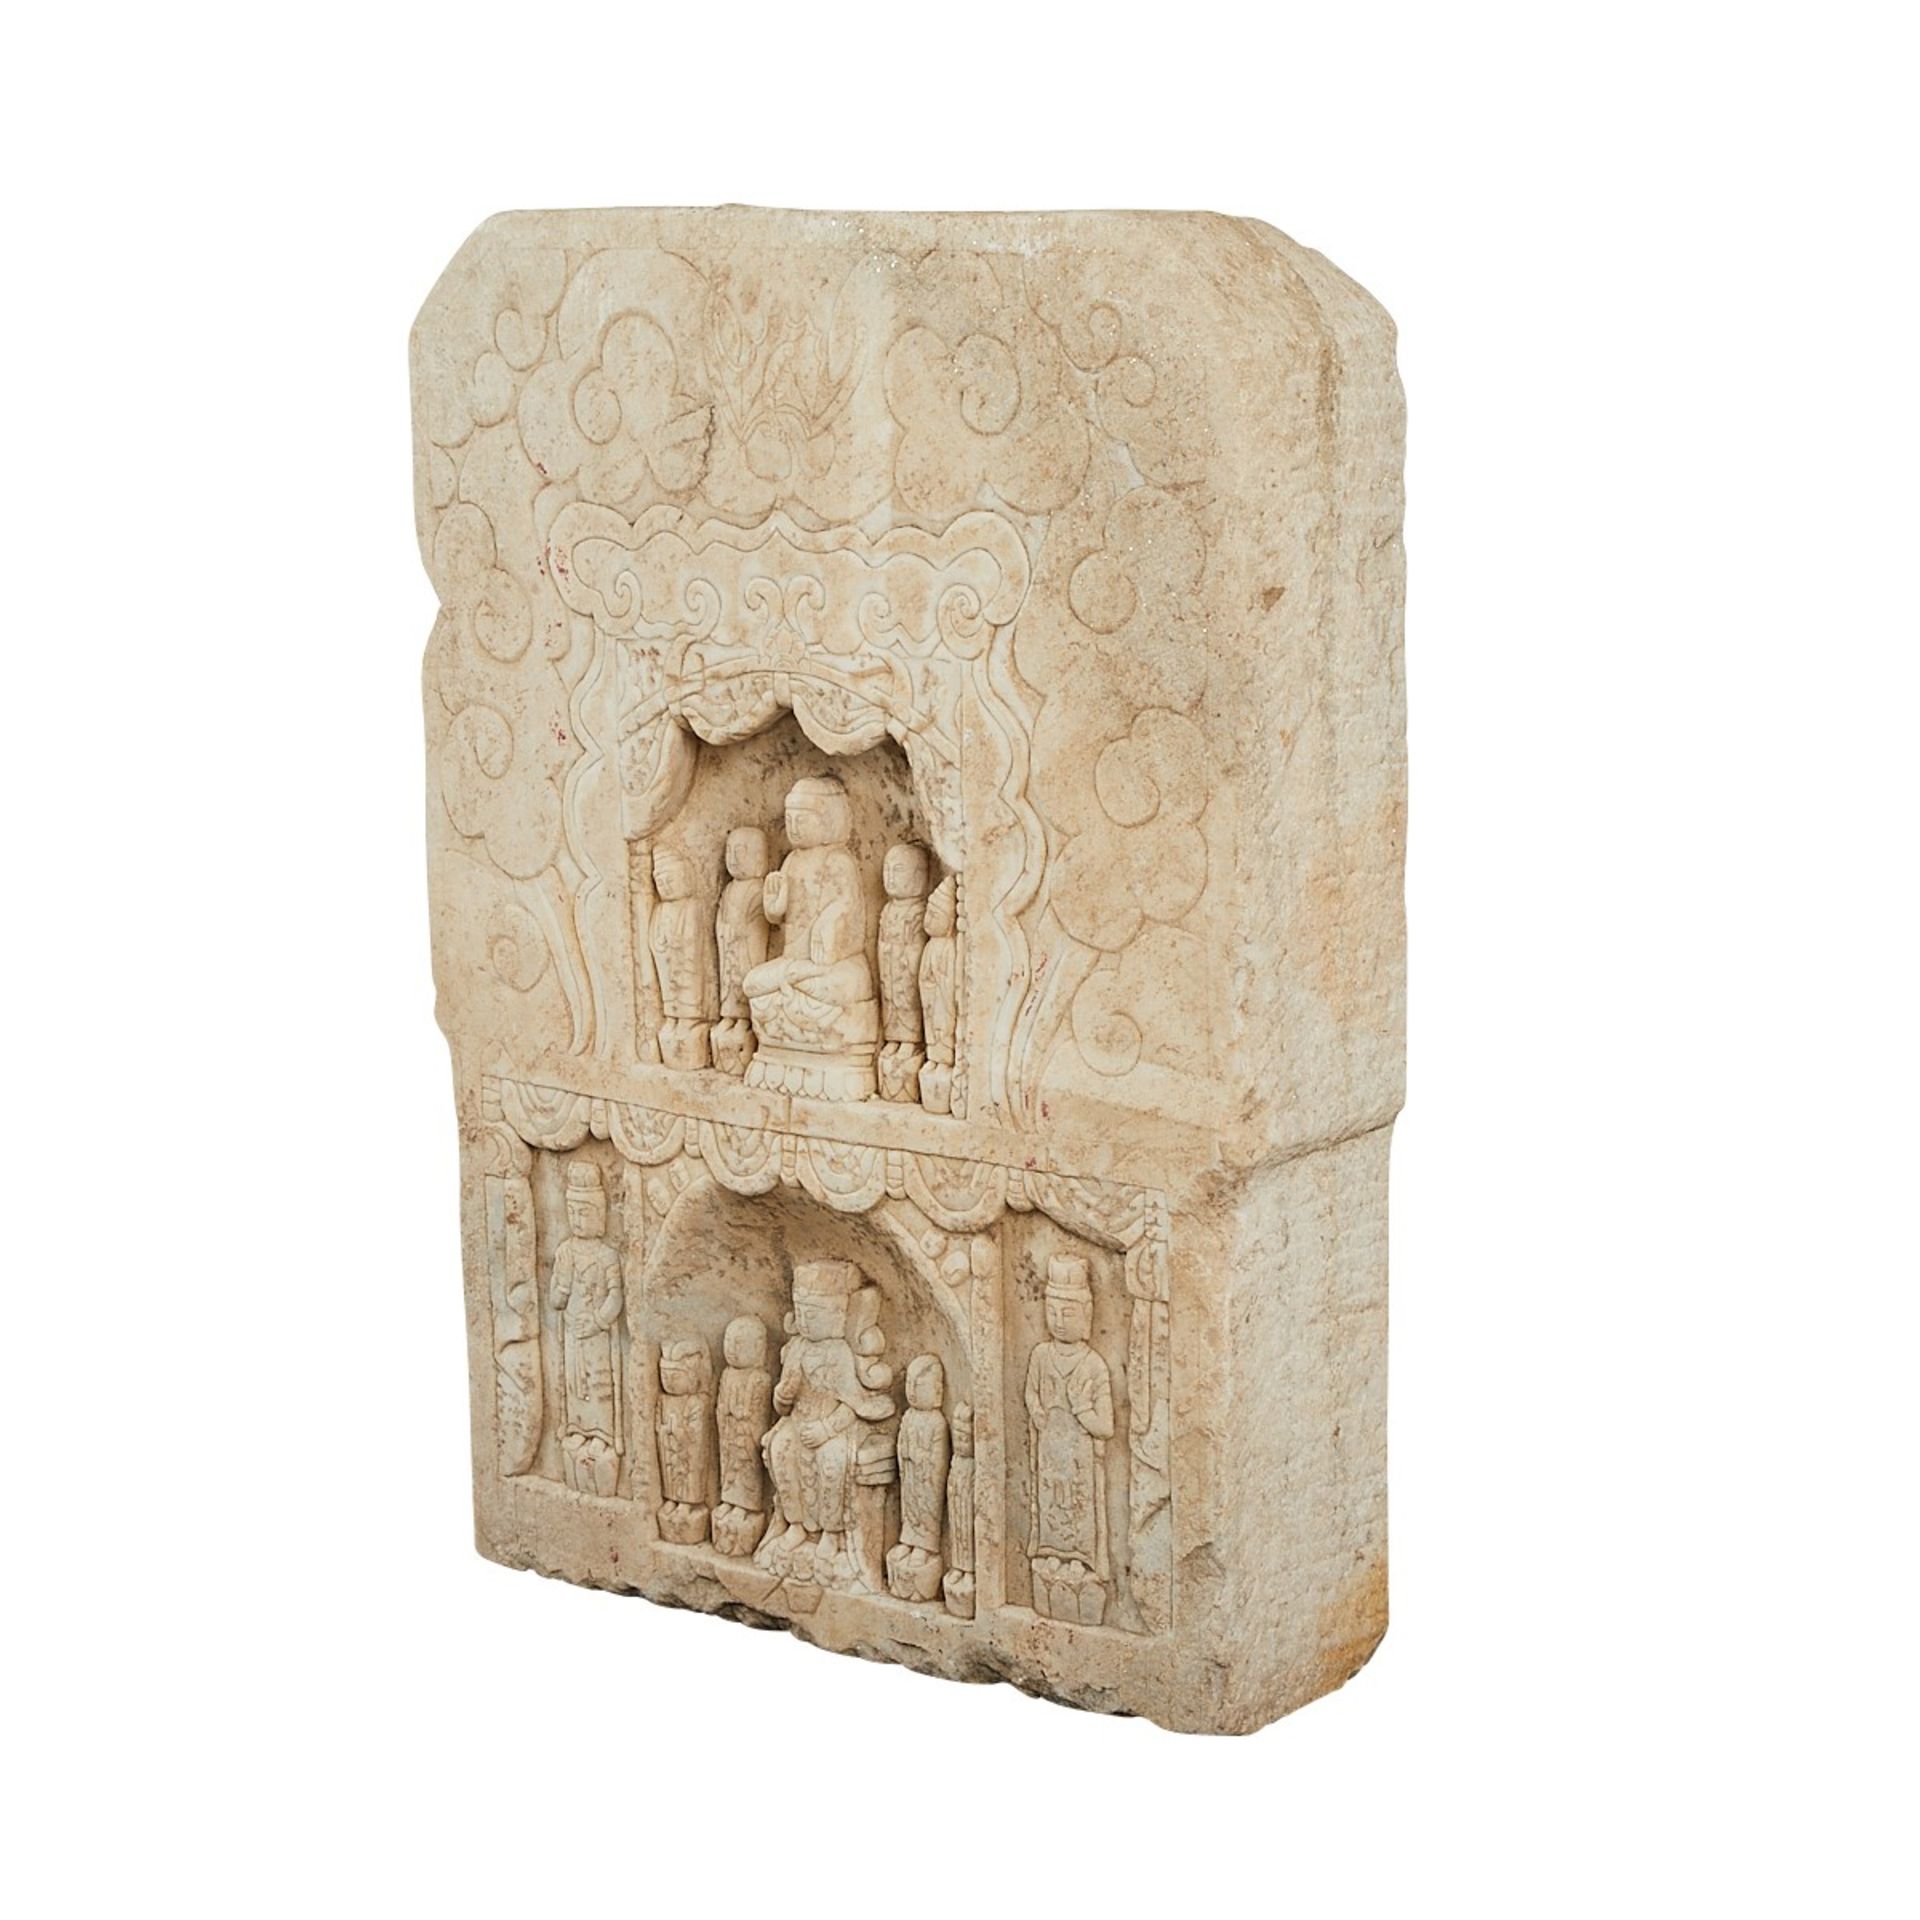 Carved Marble Buddha Vignette - Image 8 of 11